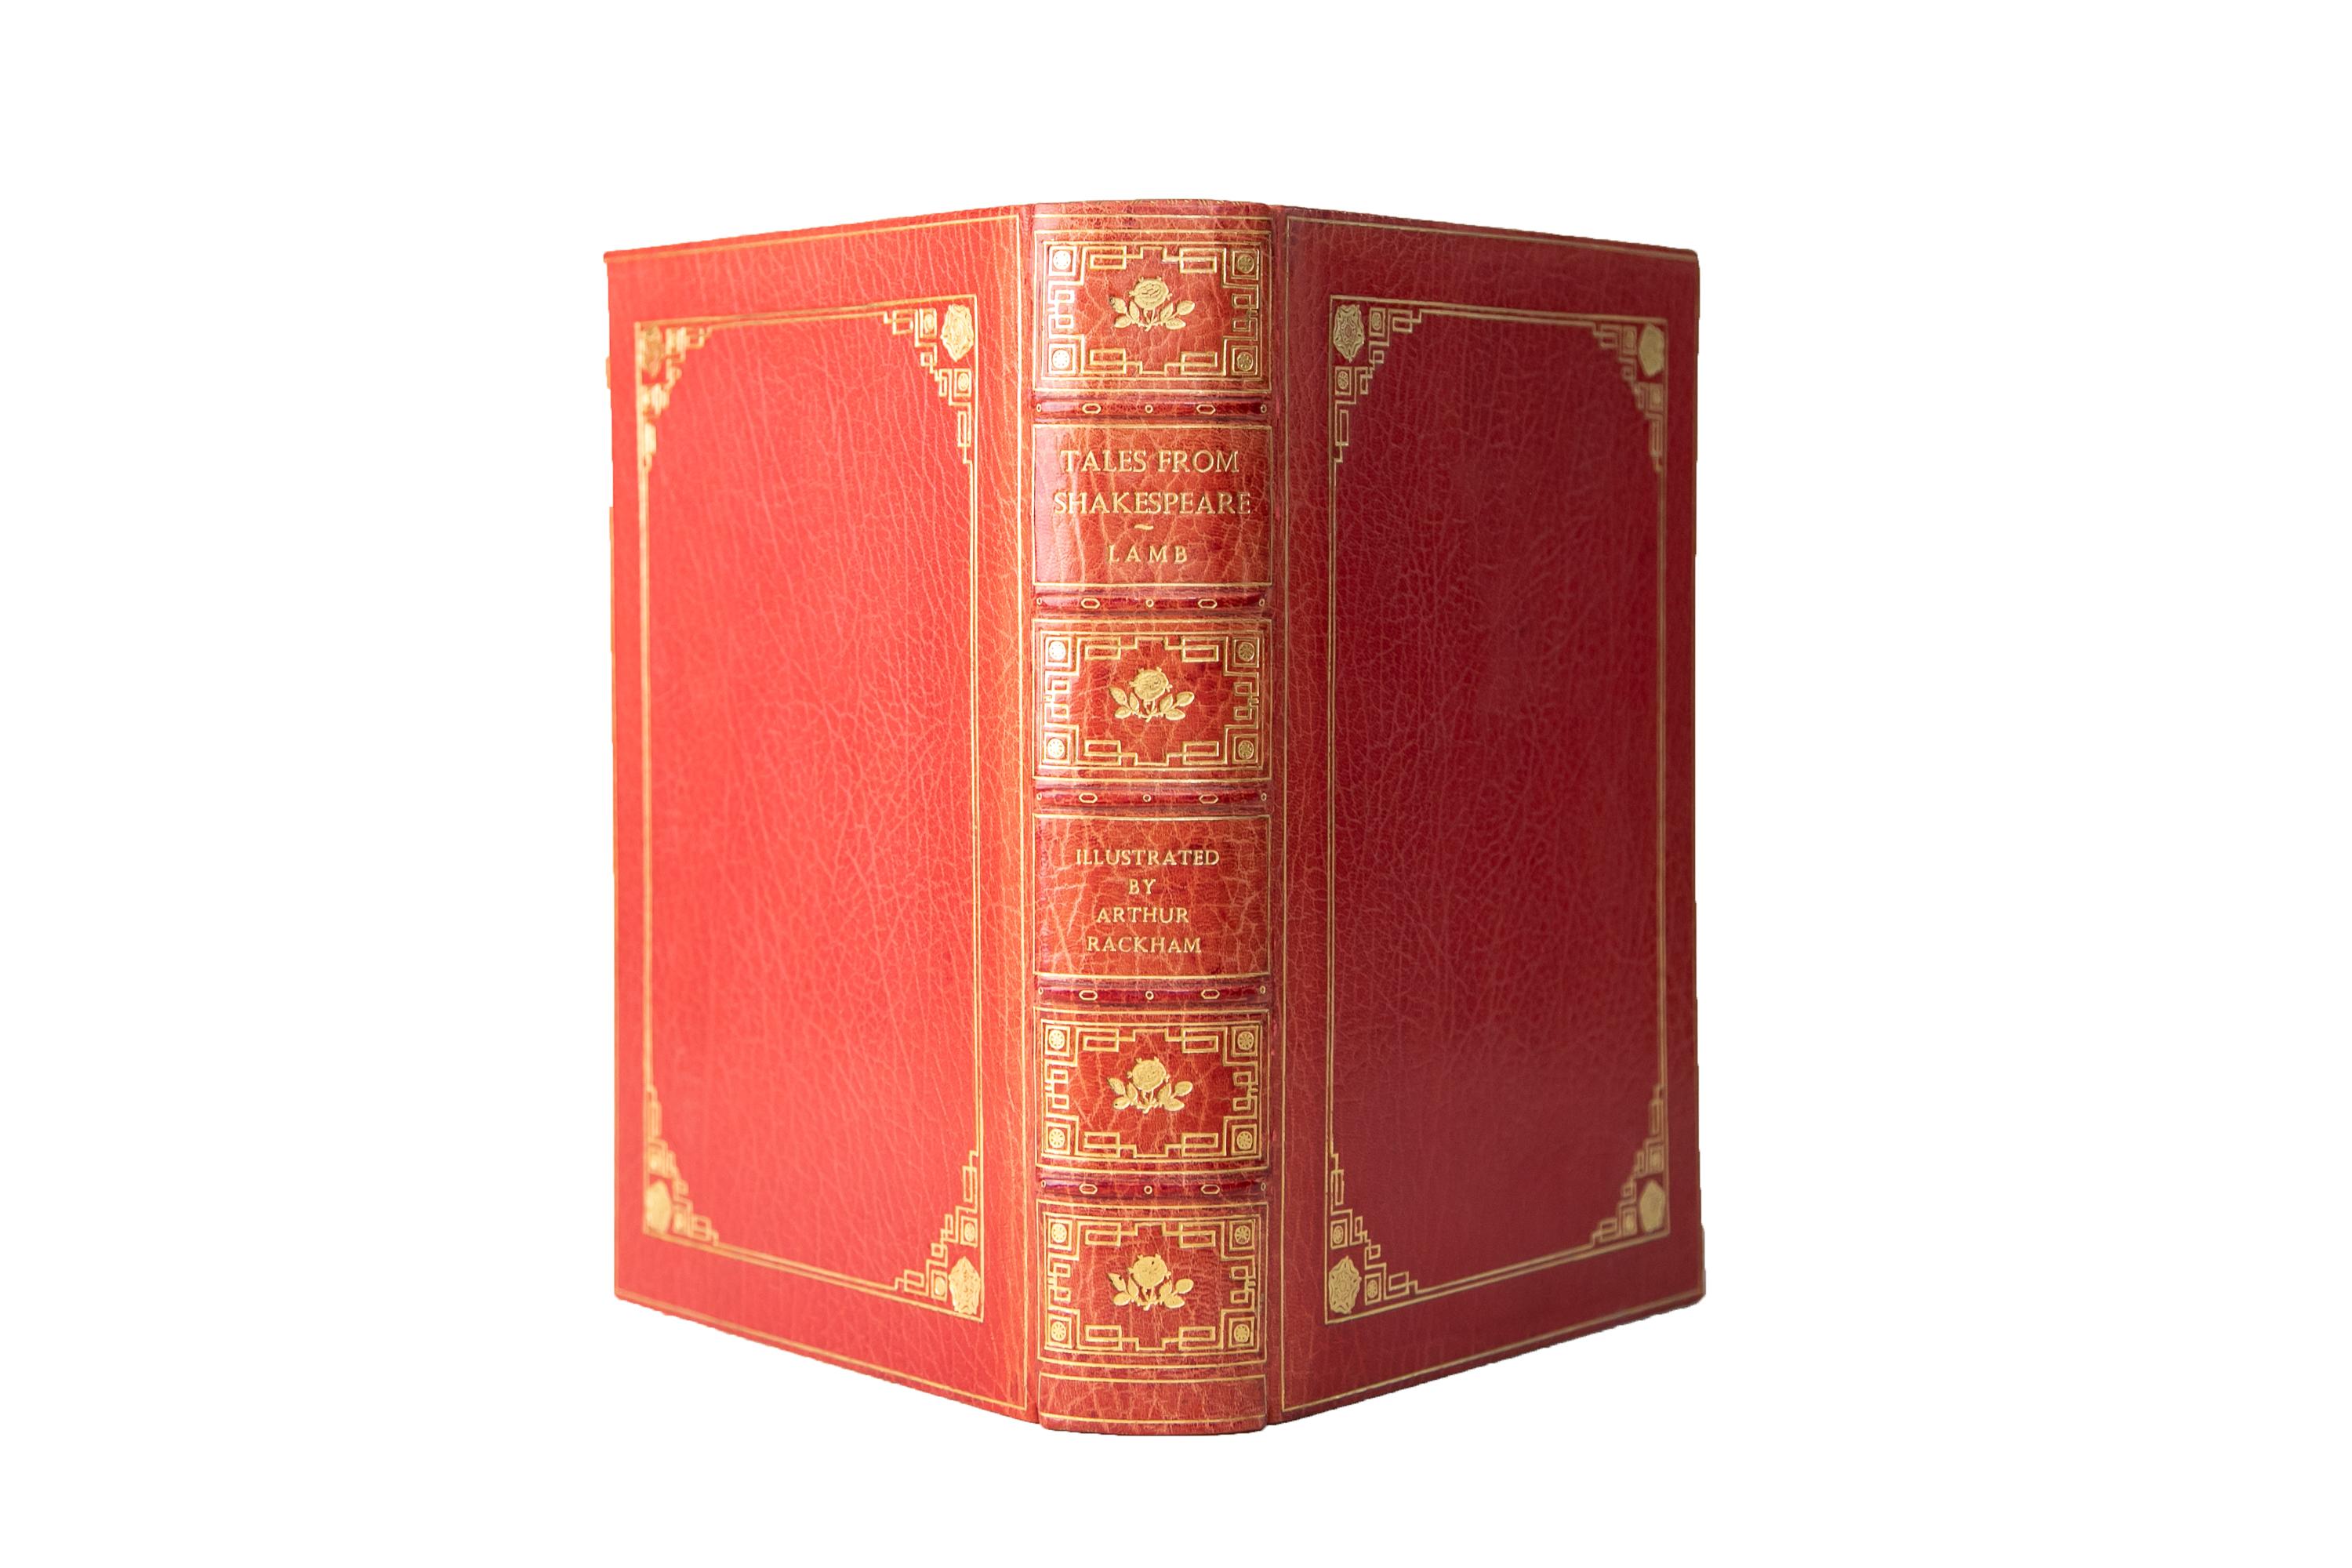 1 Volume. Charles & Mary Lamb, Tales From Shakespeare. Large Paper Edition. Bound by Bayntun in full red Morocco with the covers displaying a gilt-tooled border including floral corner flourishes. The spine displays raised bands, intricate panel